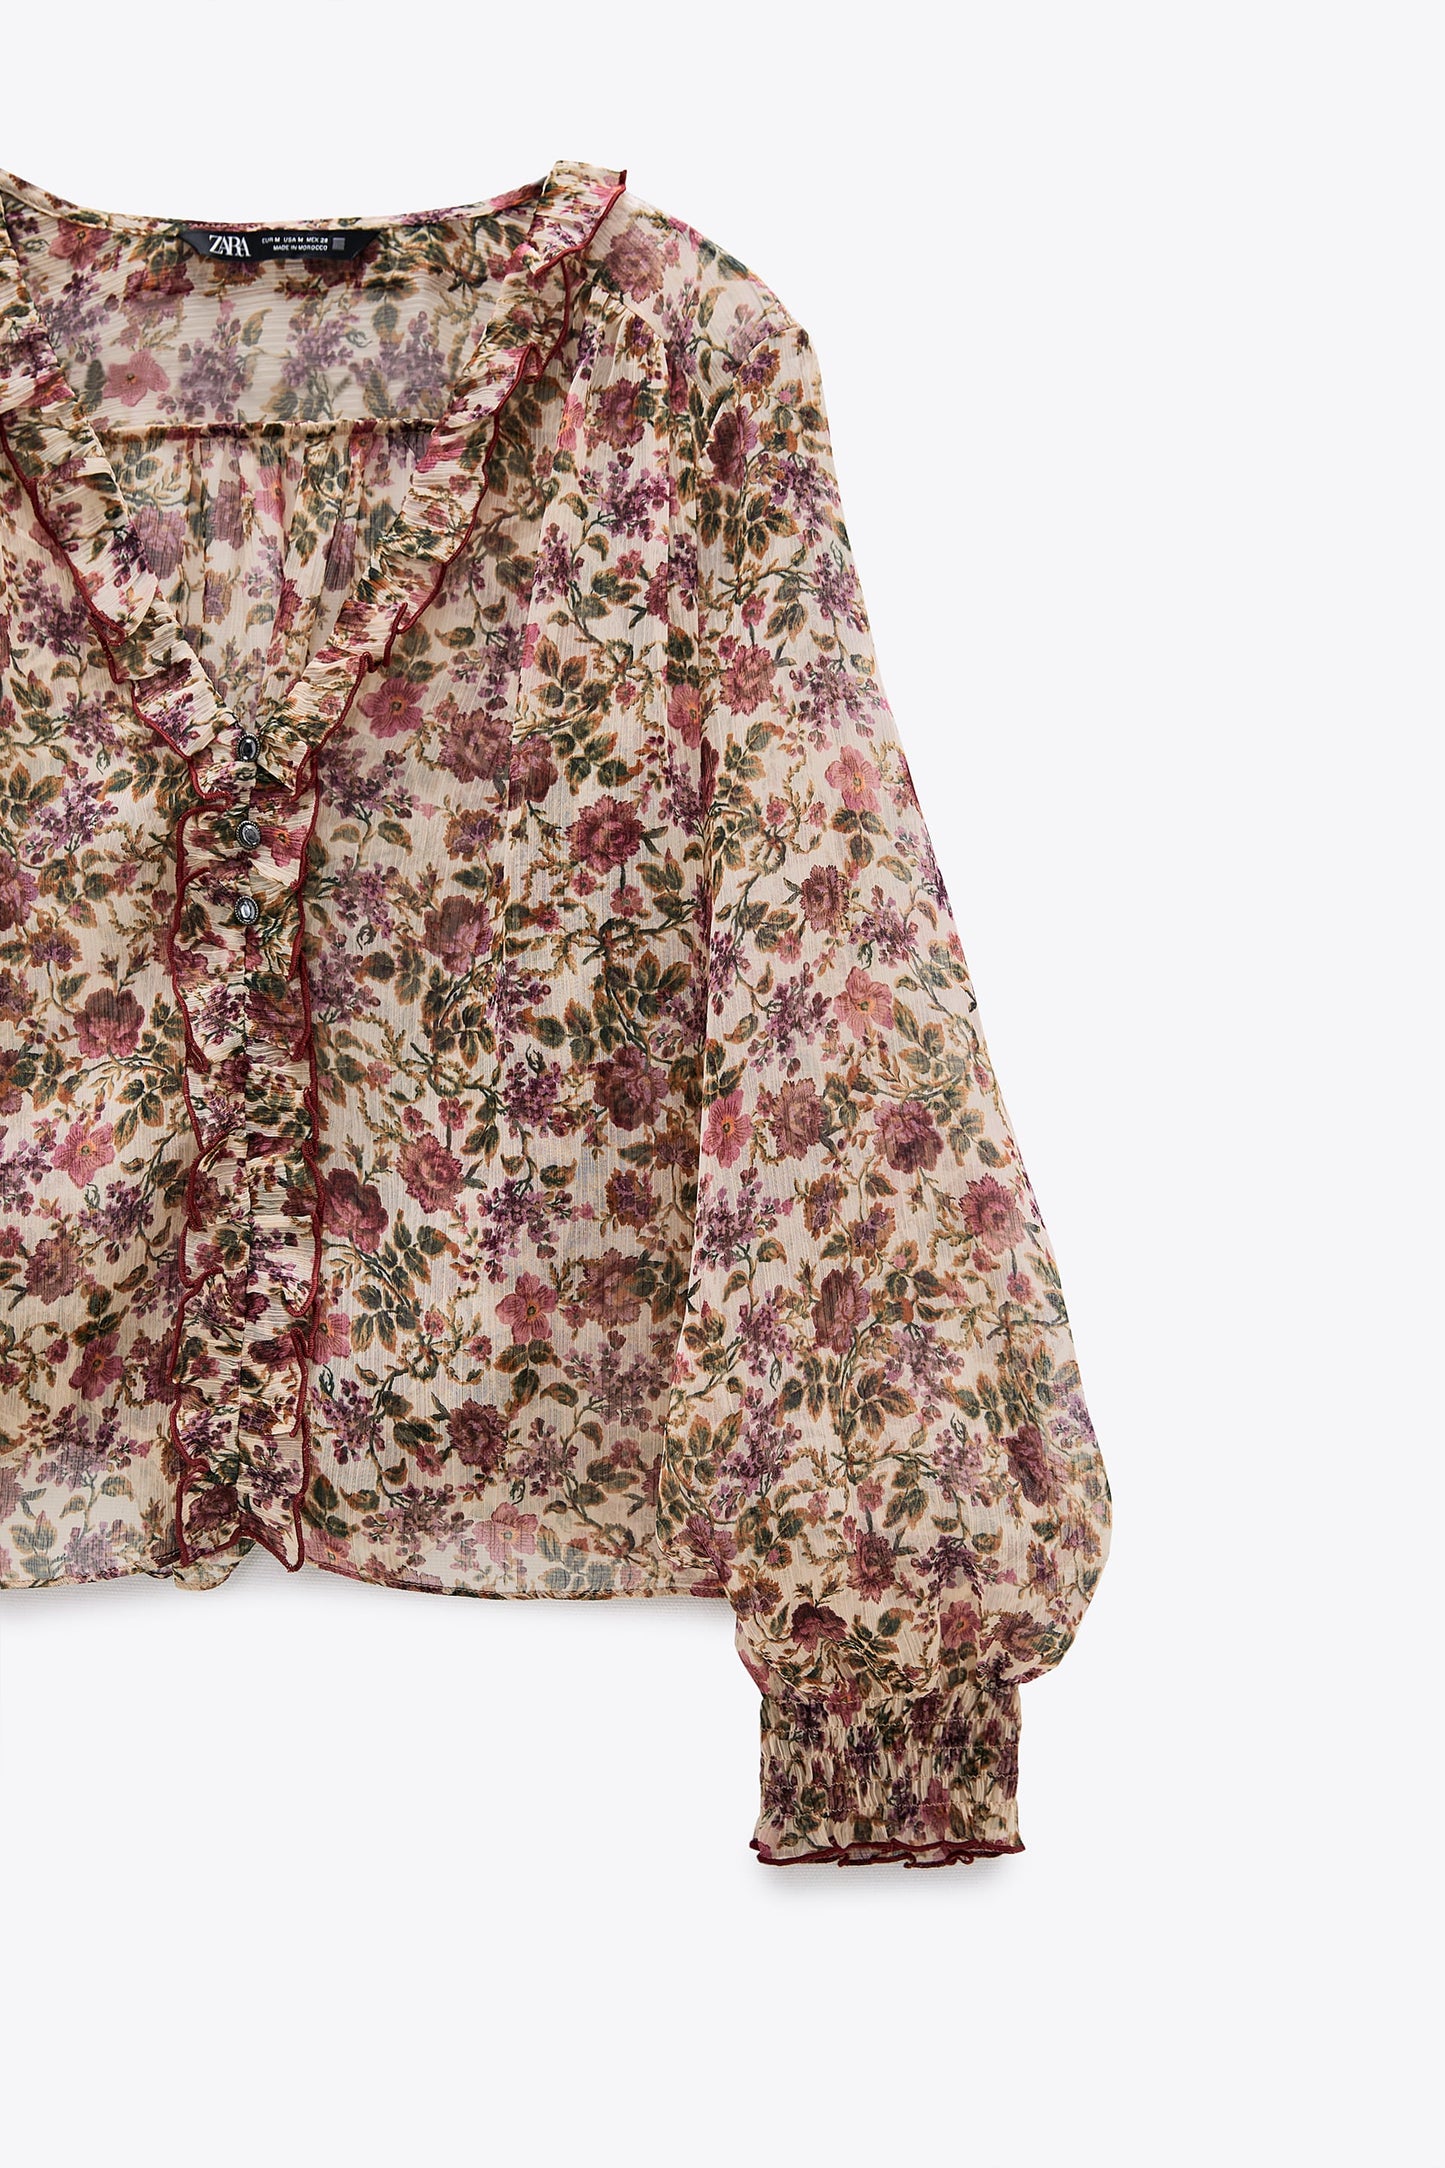 Sheer Floral Blouse - XS (oversized)